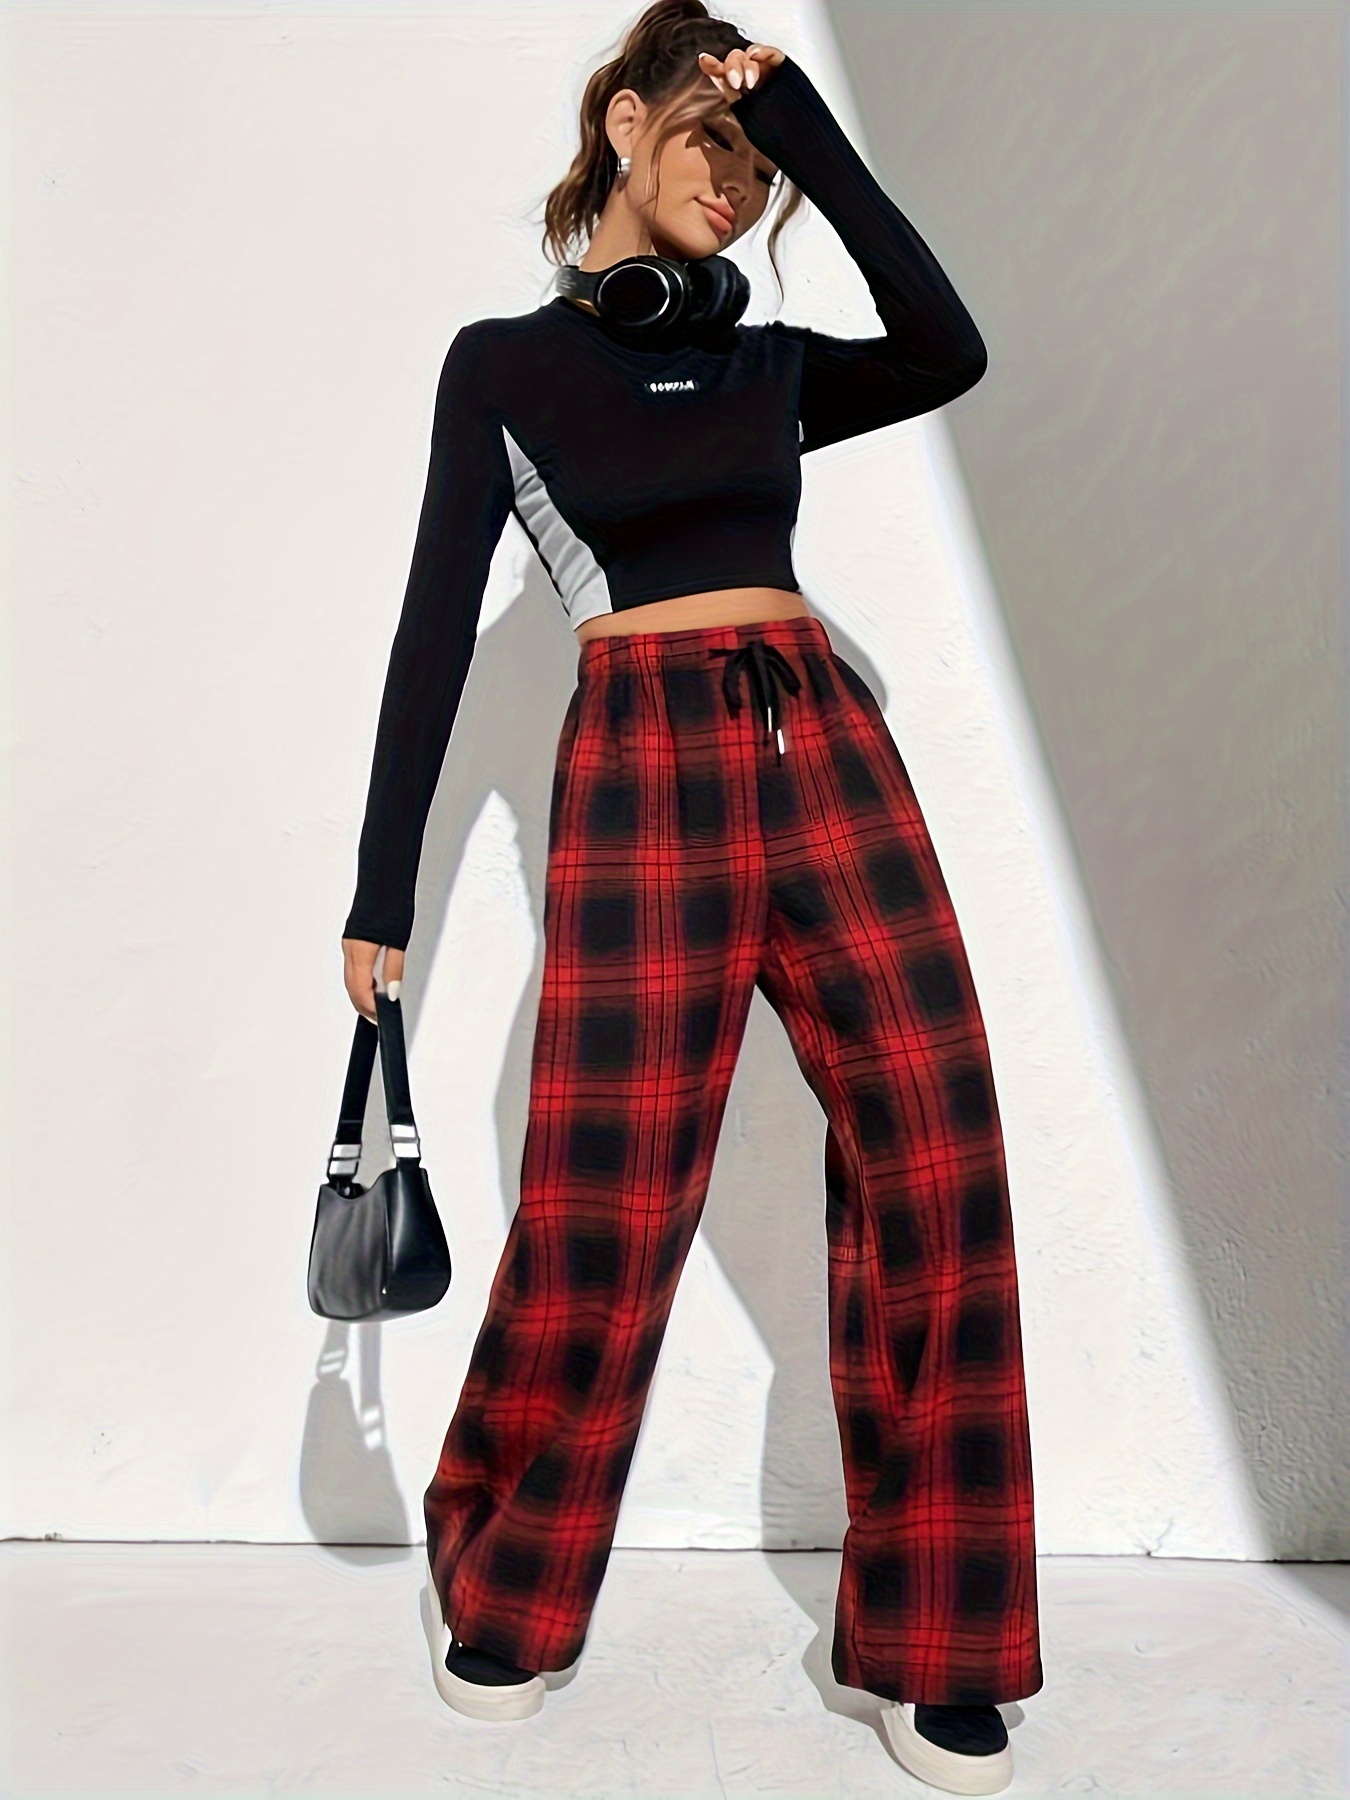 Red plaid pants – The best products with free shipping